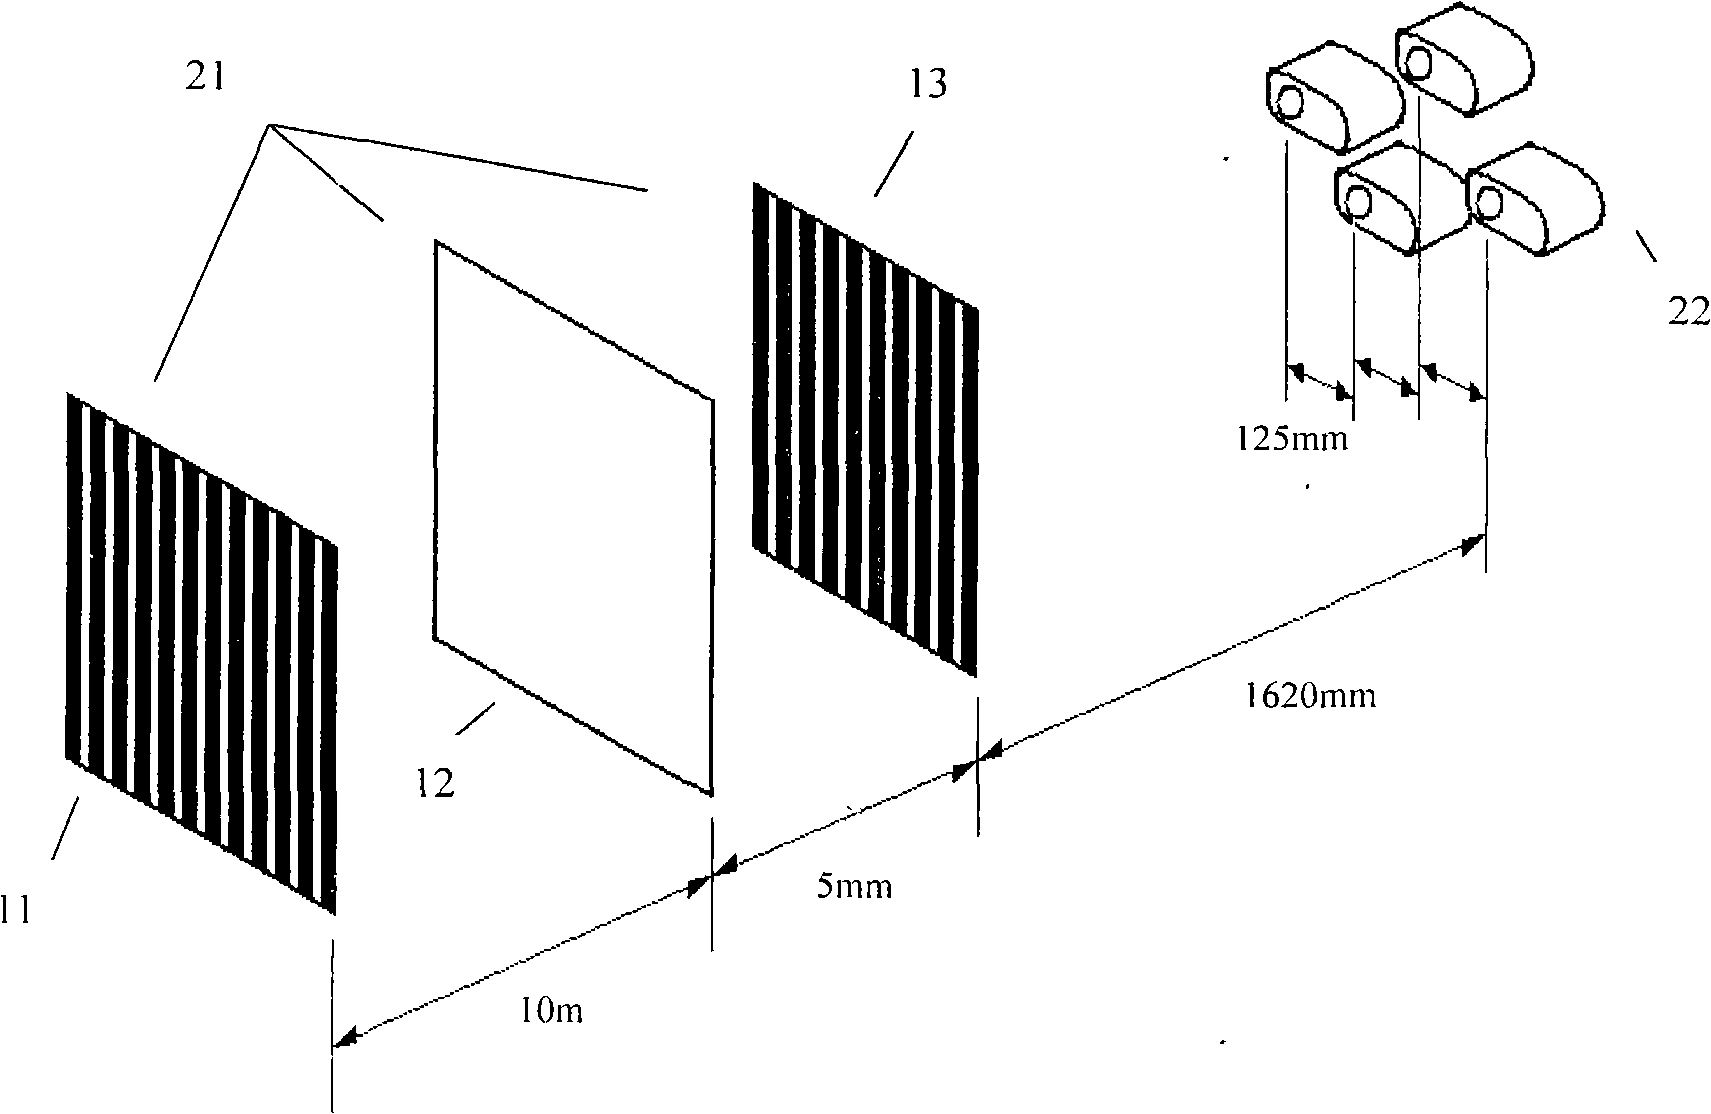 Double grating free stereo projection display apparatus